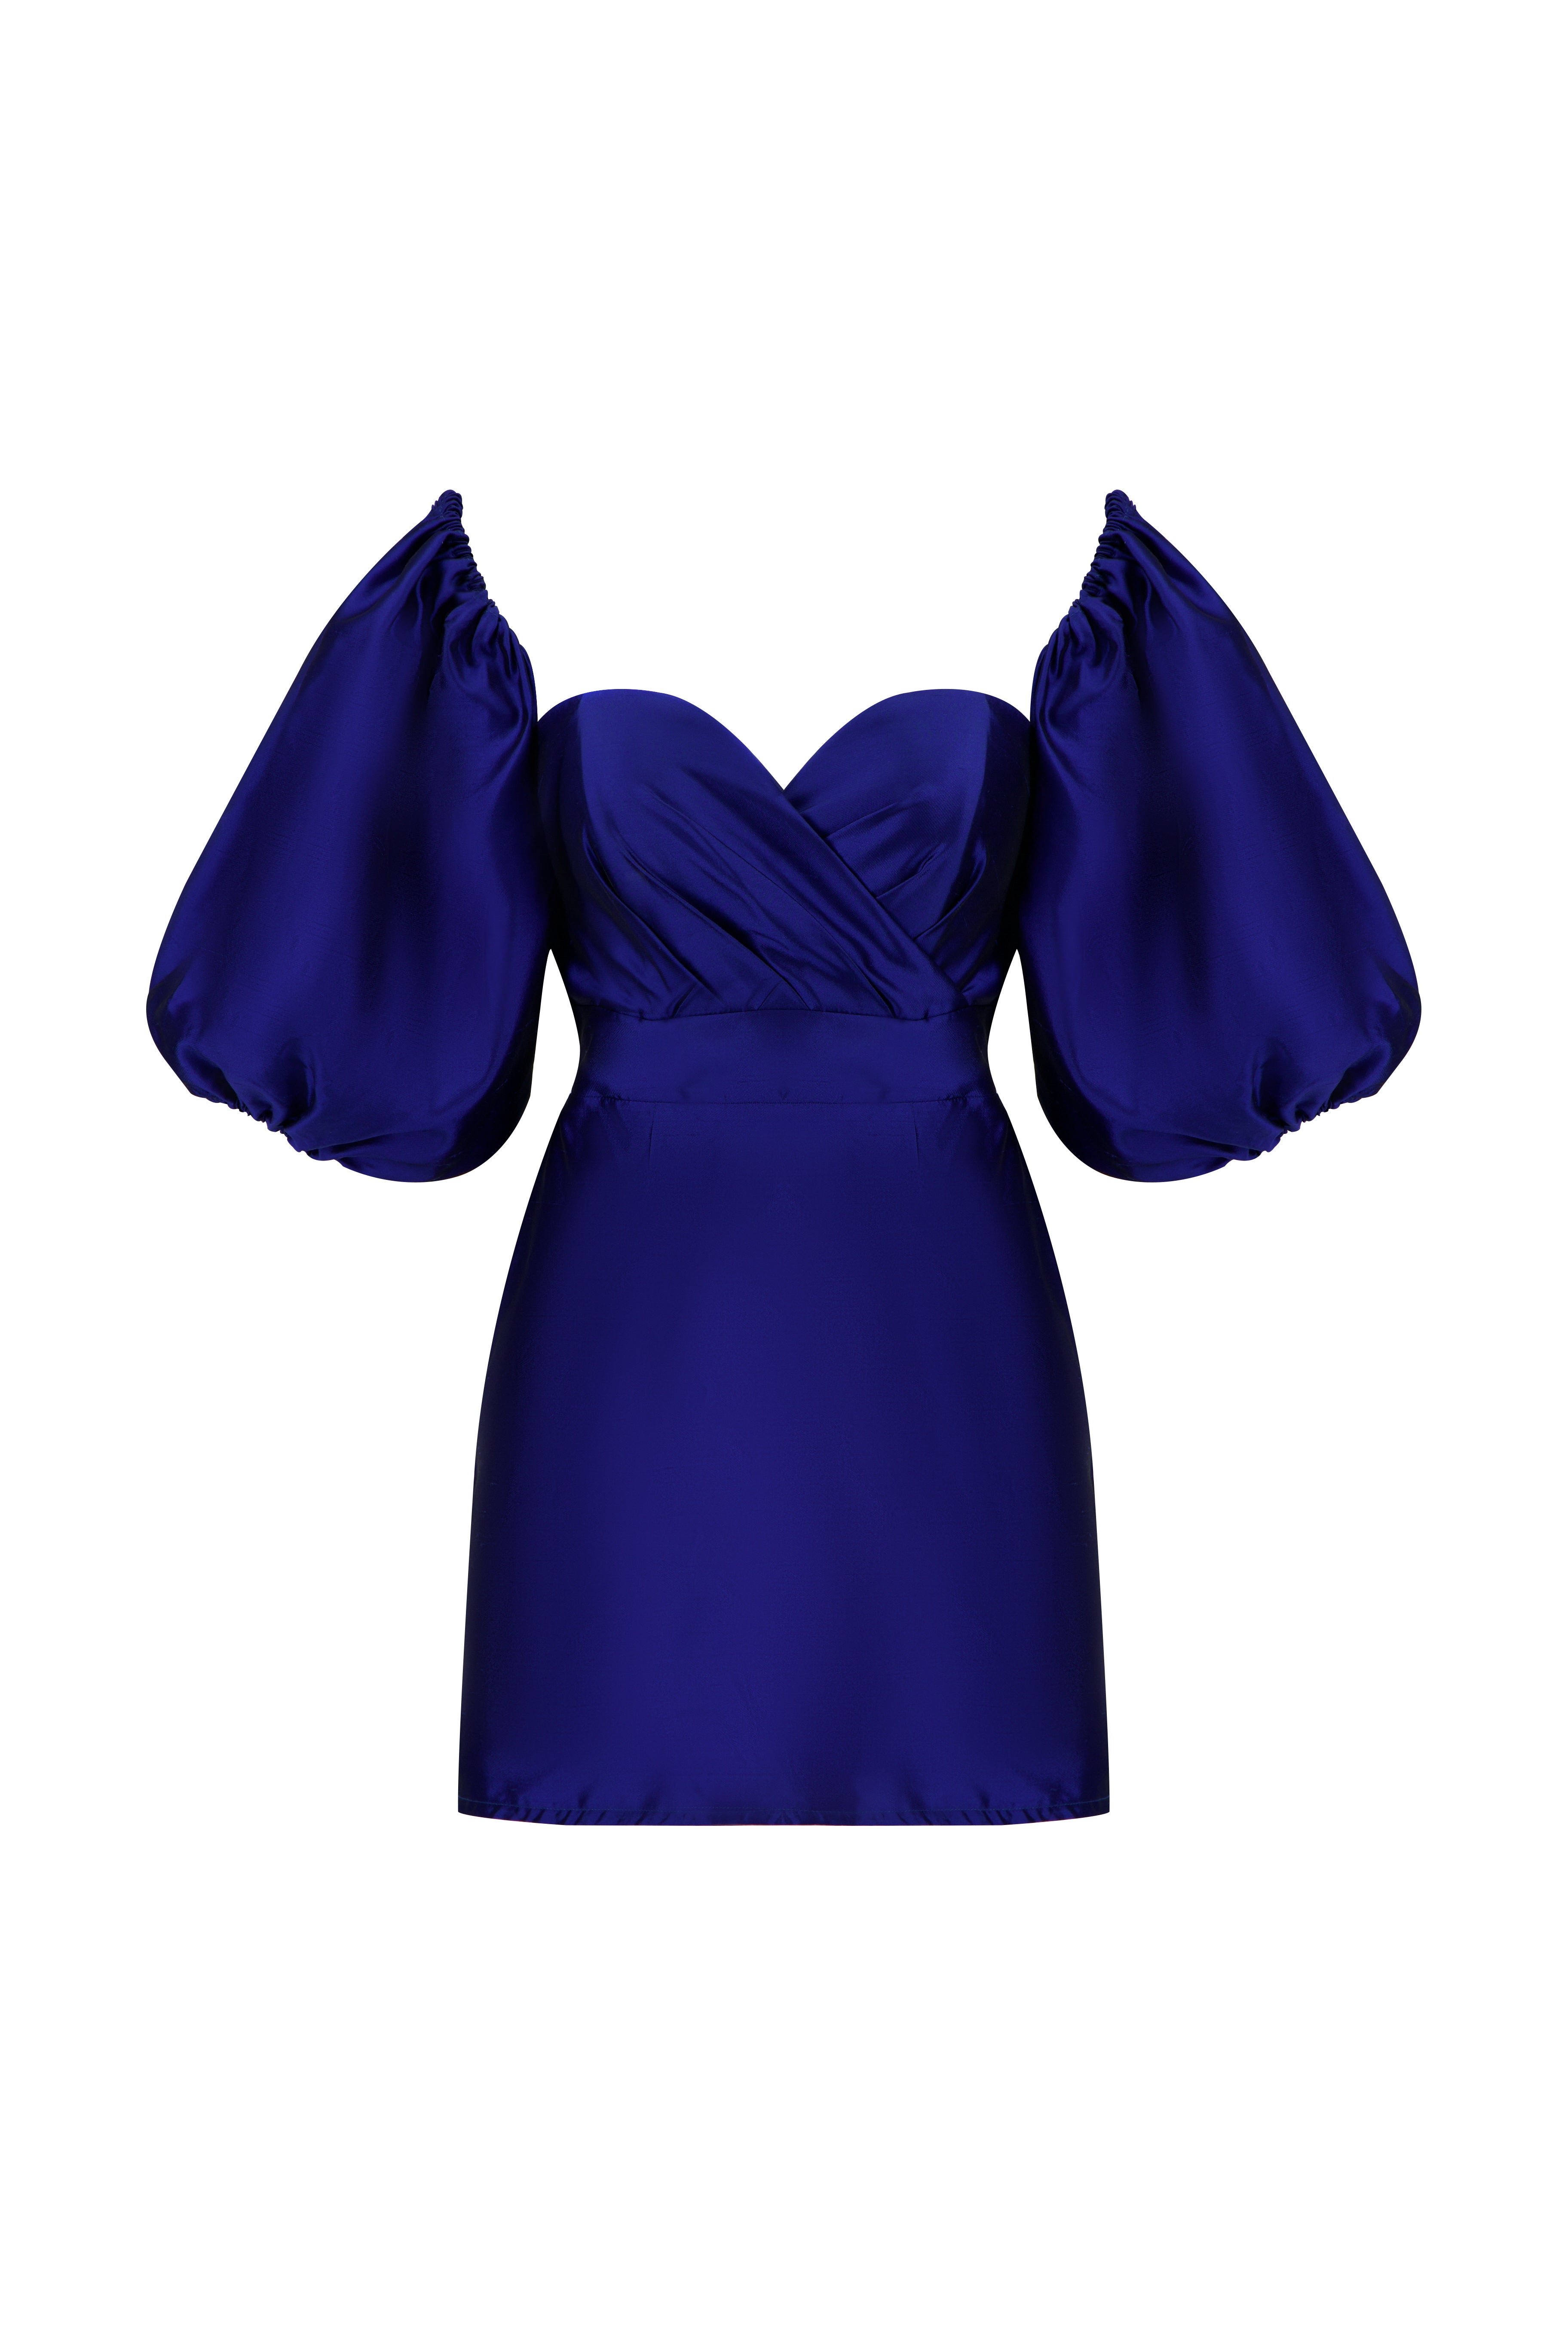 Front view of the deep blue colour evening dress